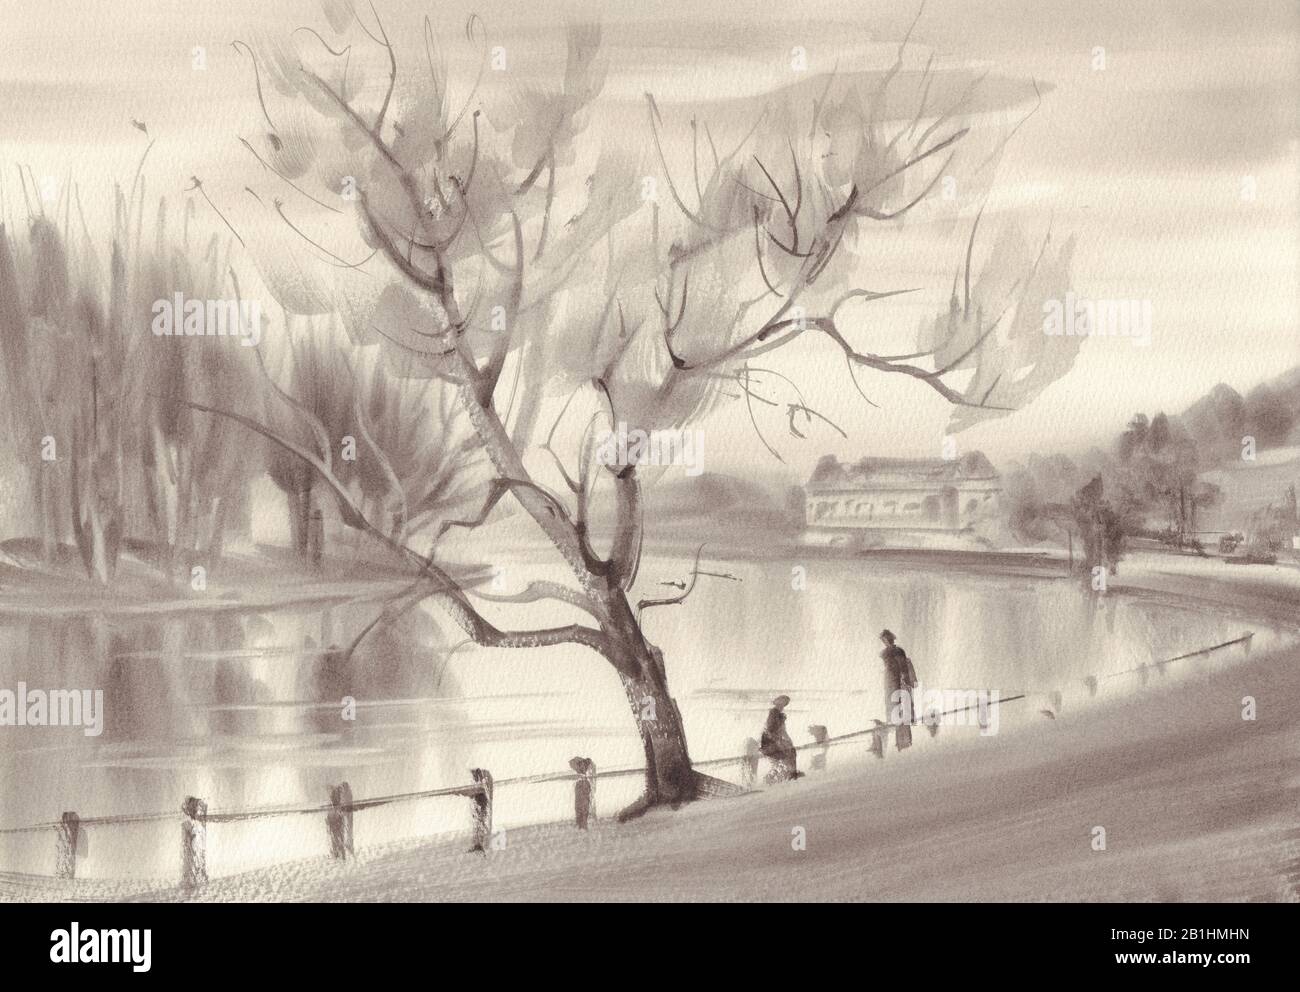 River landscape in sepia watercolor vintage background Stock Photo